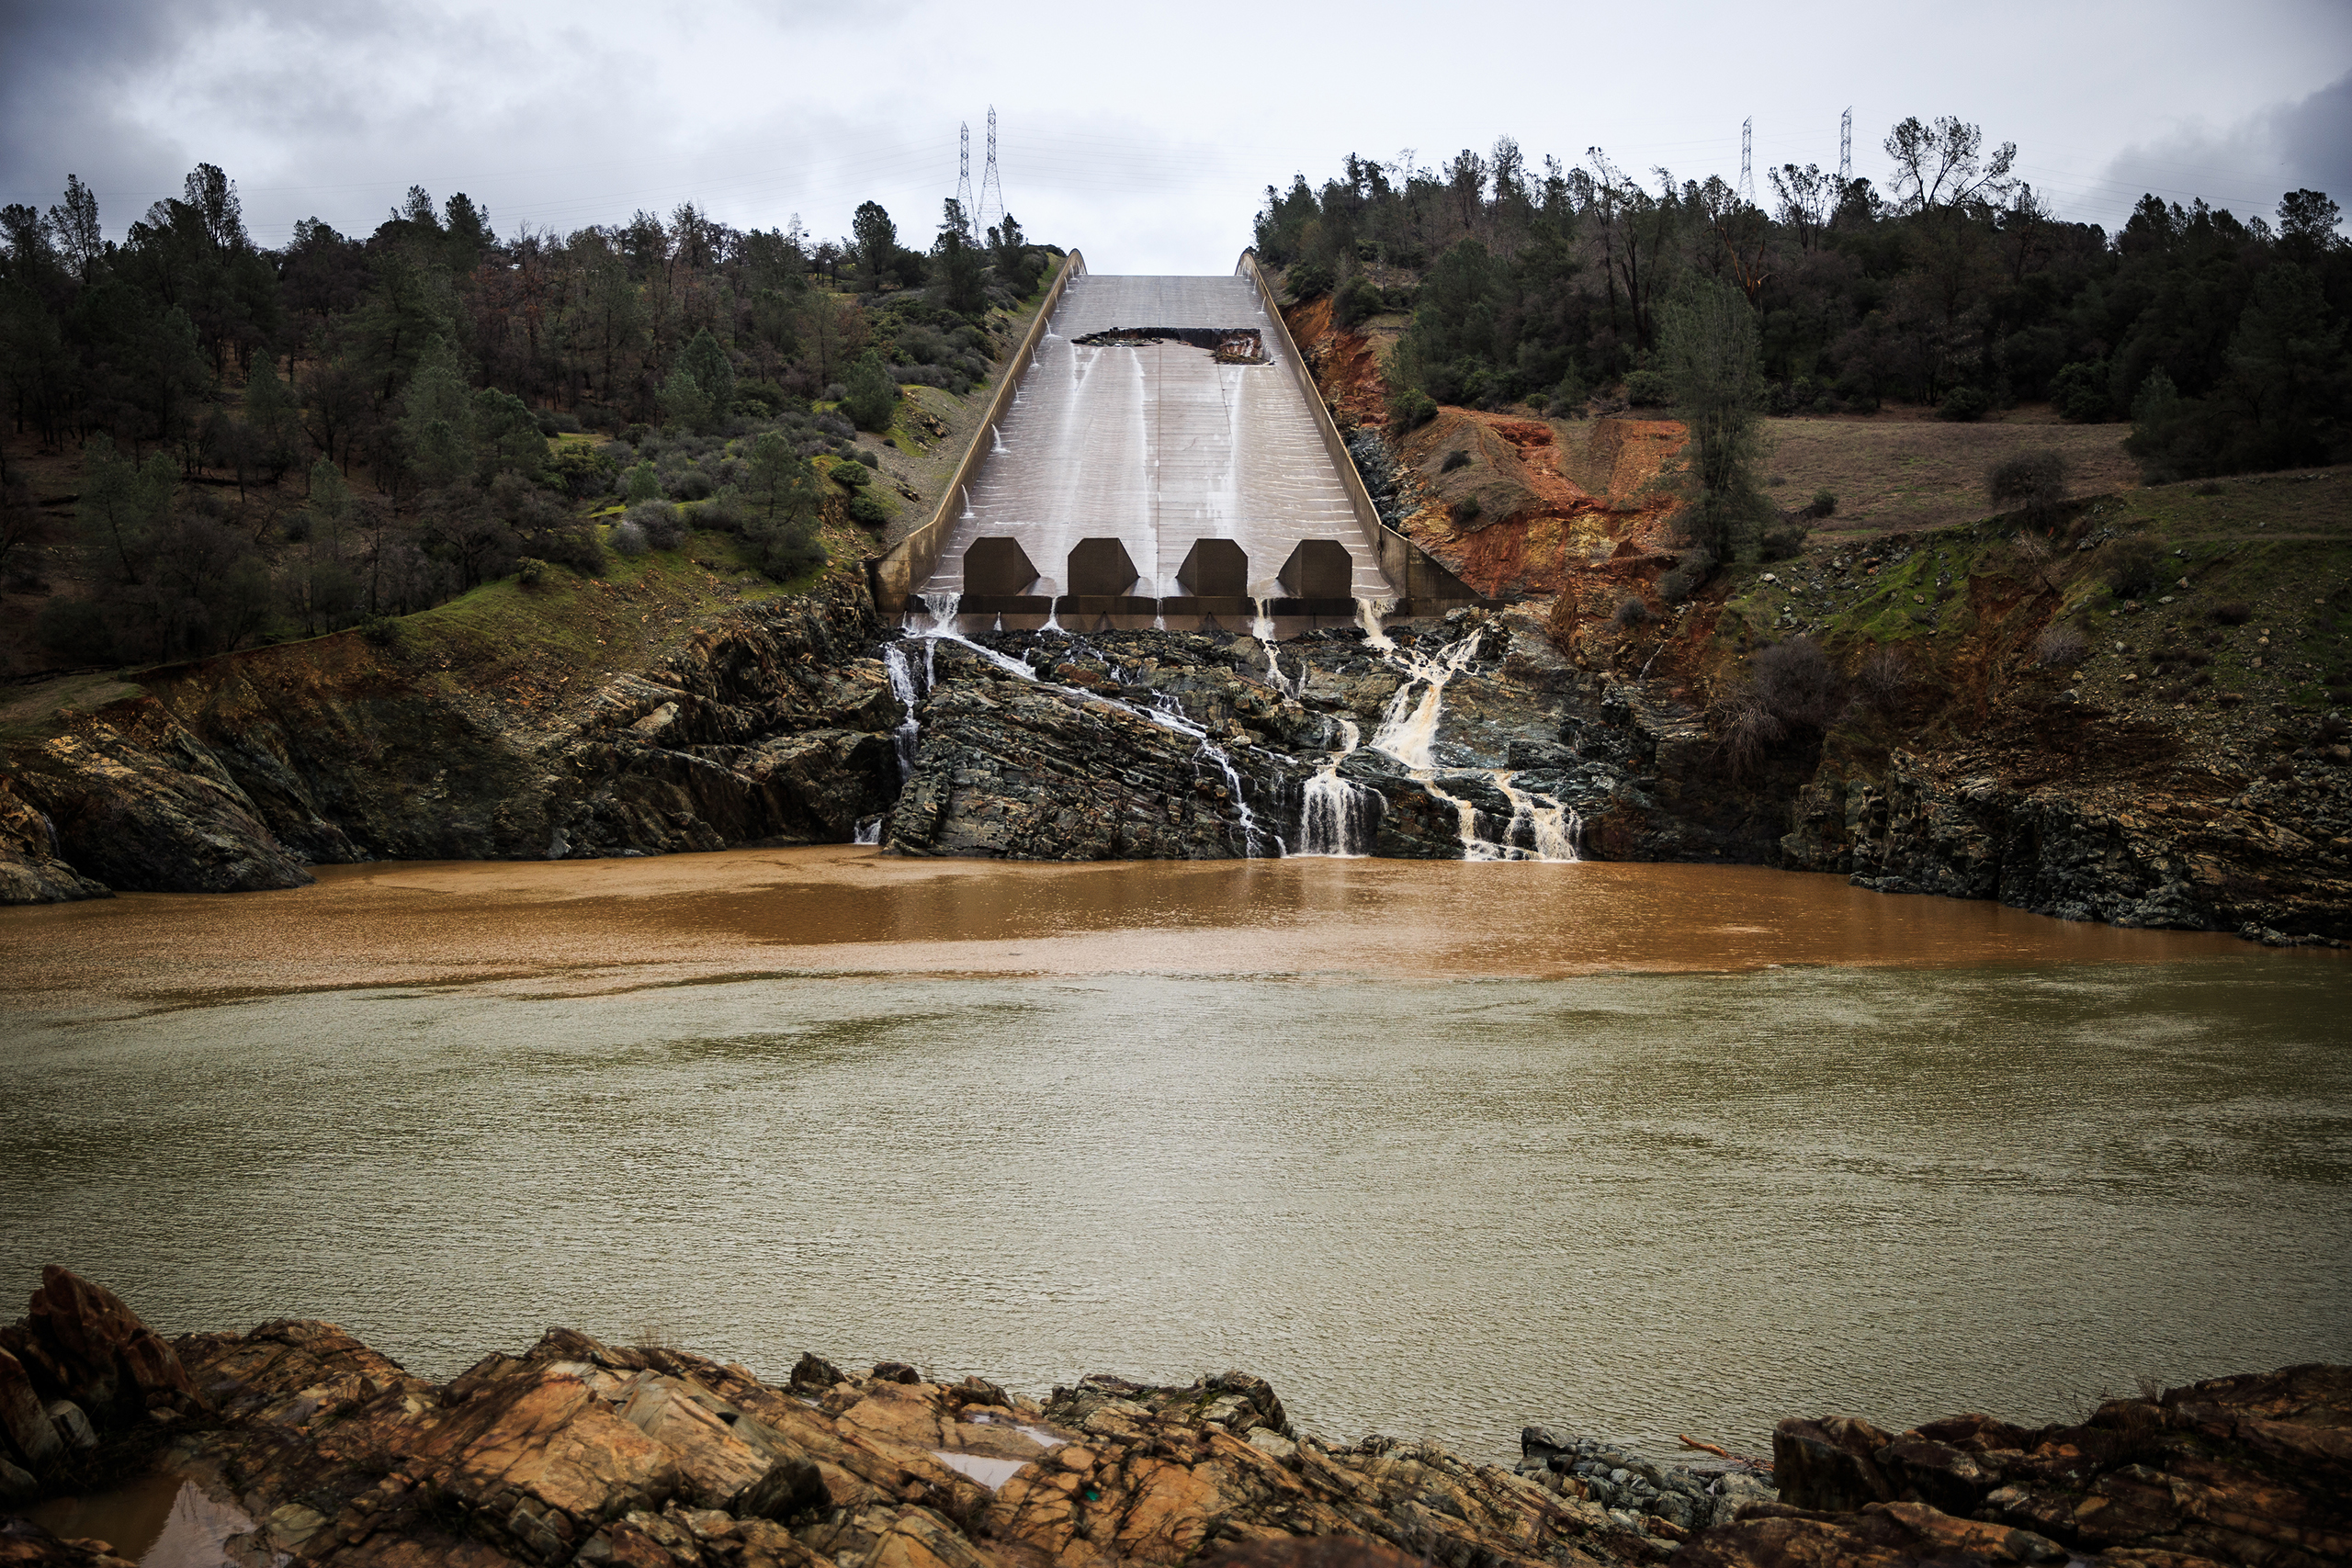 A hole was torn in the spillway of the Oroville Dam while releasing approximately 60,000 cubic-feet-second of water in advance of more rain in Oroville, Calif., on Feb. 7, 2017.